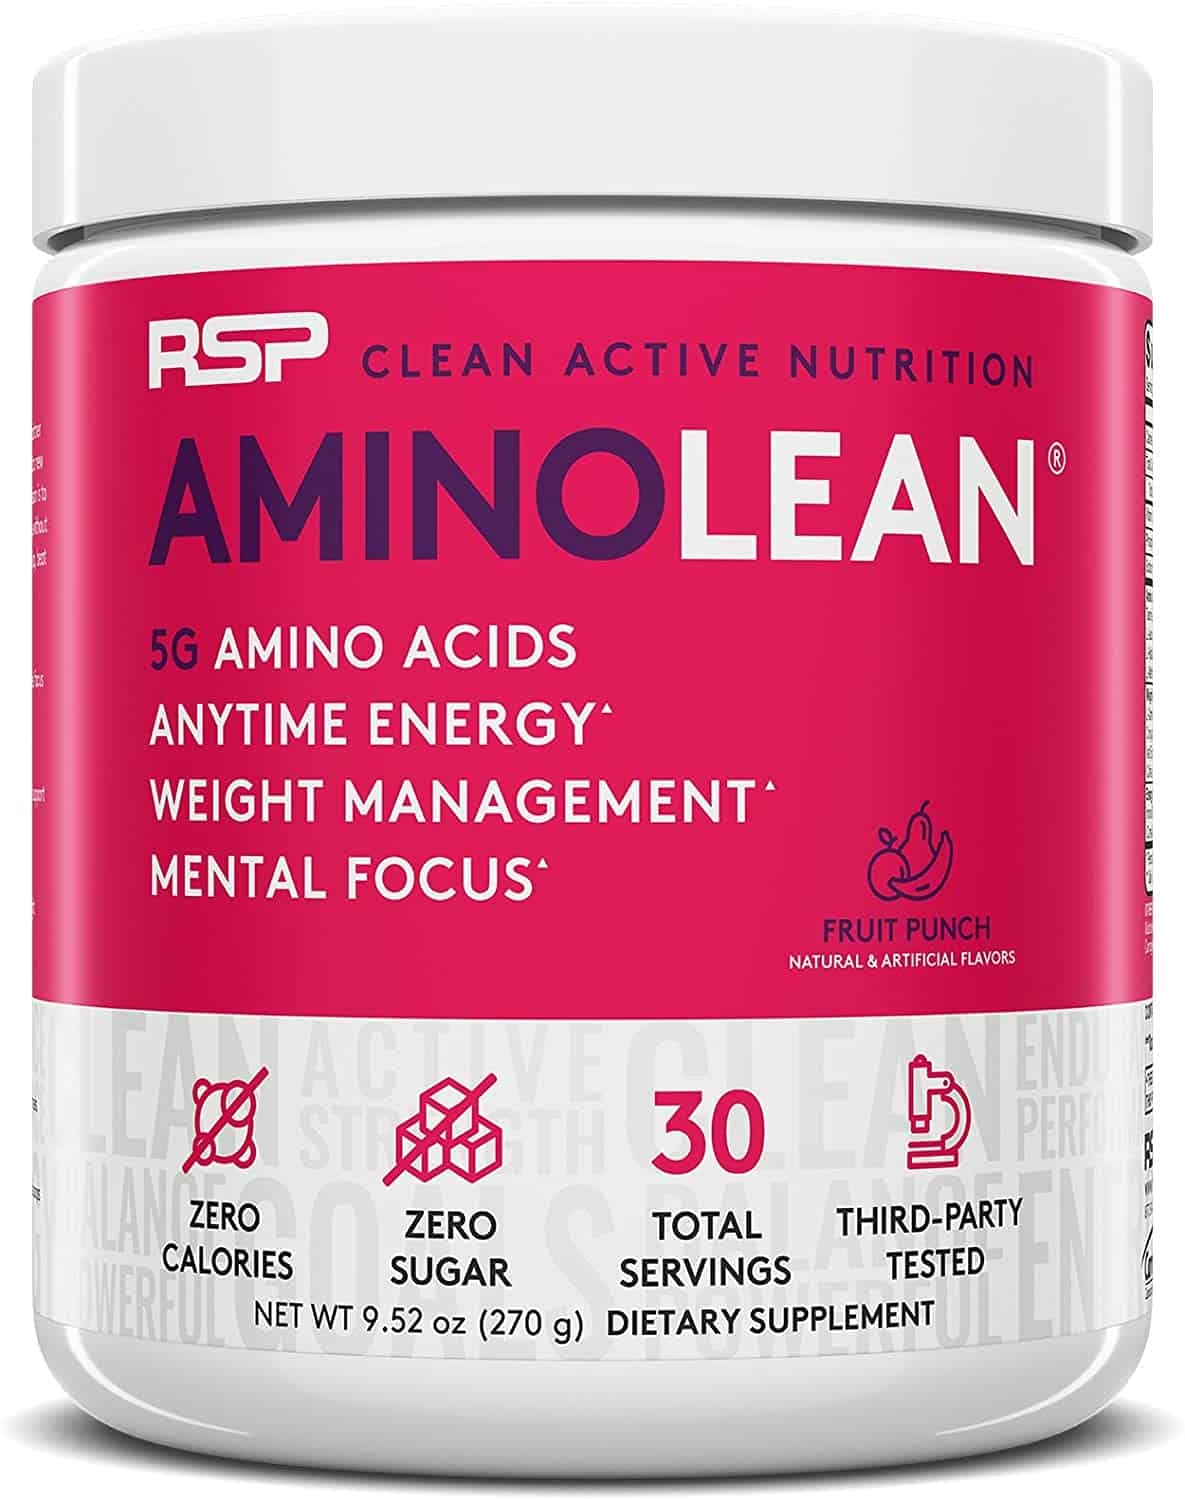 AminoLean ranks as one of the best pre workout supplements